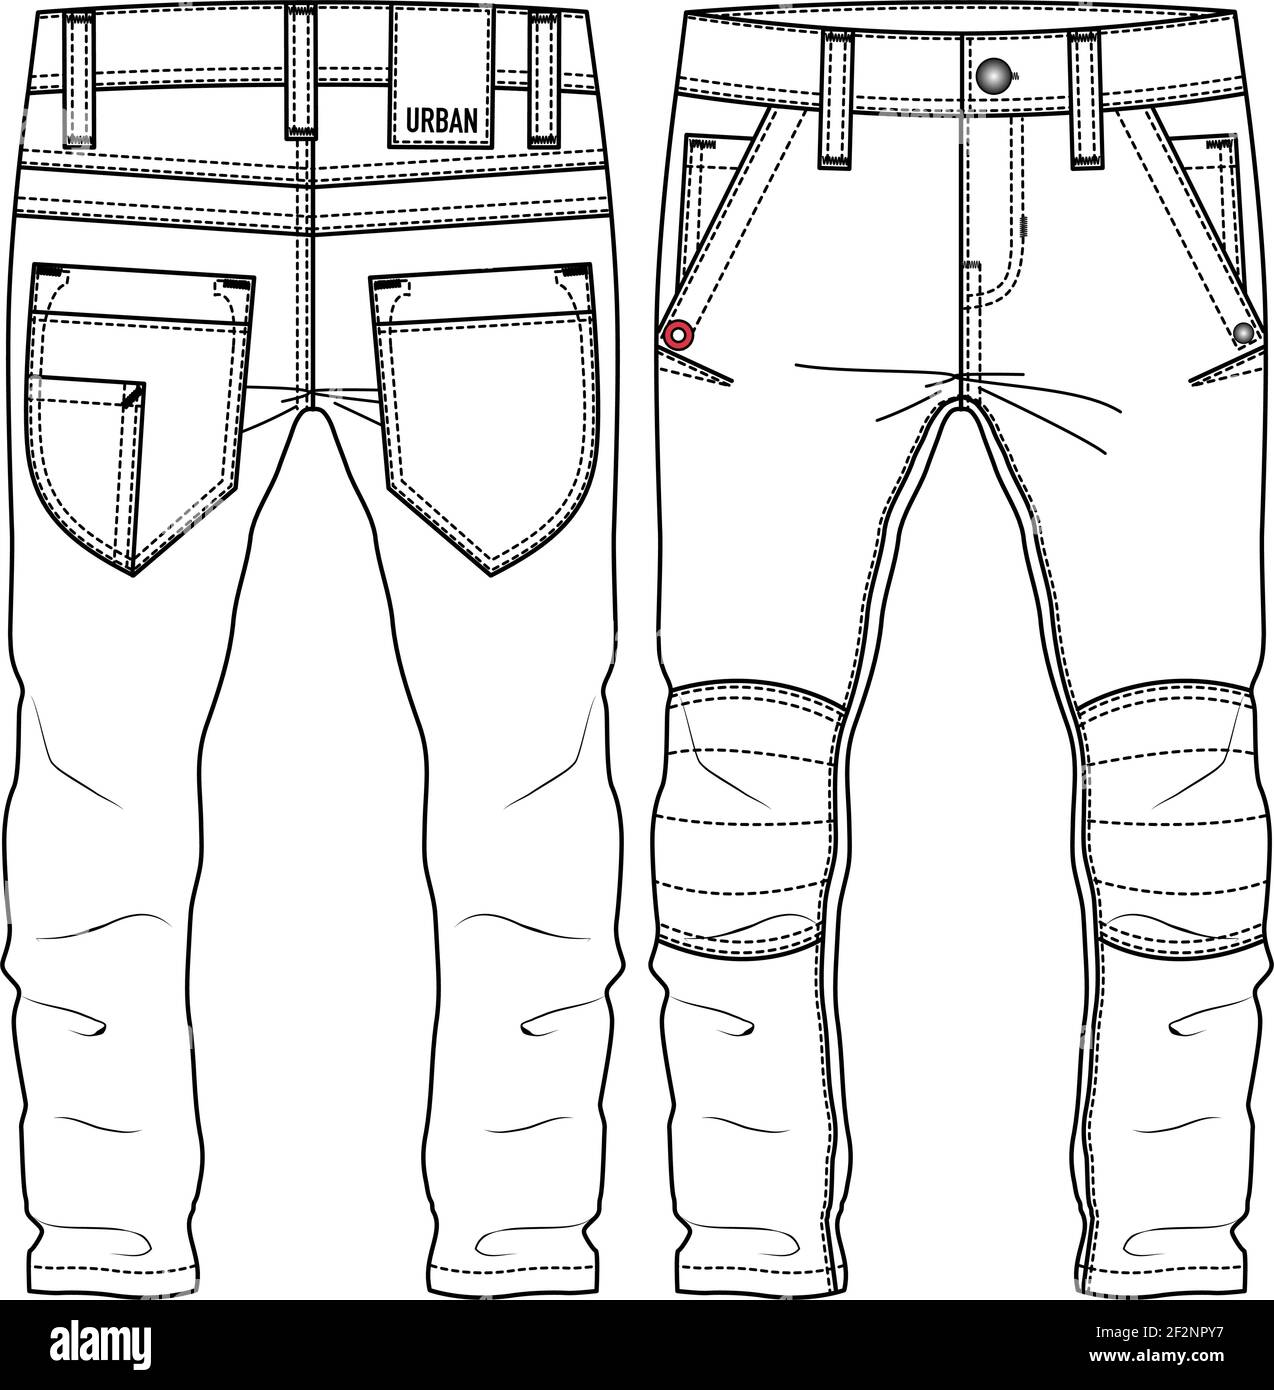 Men Boys Urban Look Pant fashion flat sketch template. Technical Fashion Illustration. Woven CAD. Slim fit. Cut and sew at Knees Stock Vector